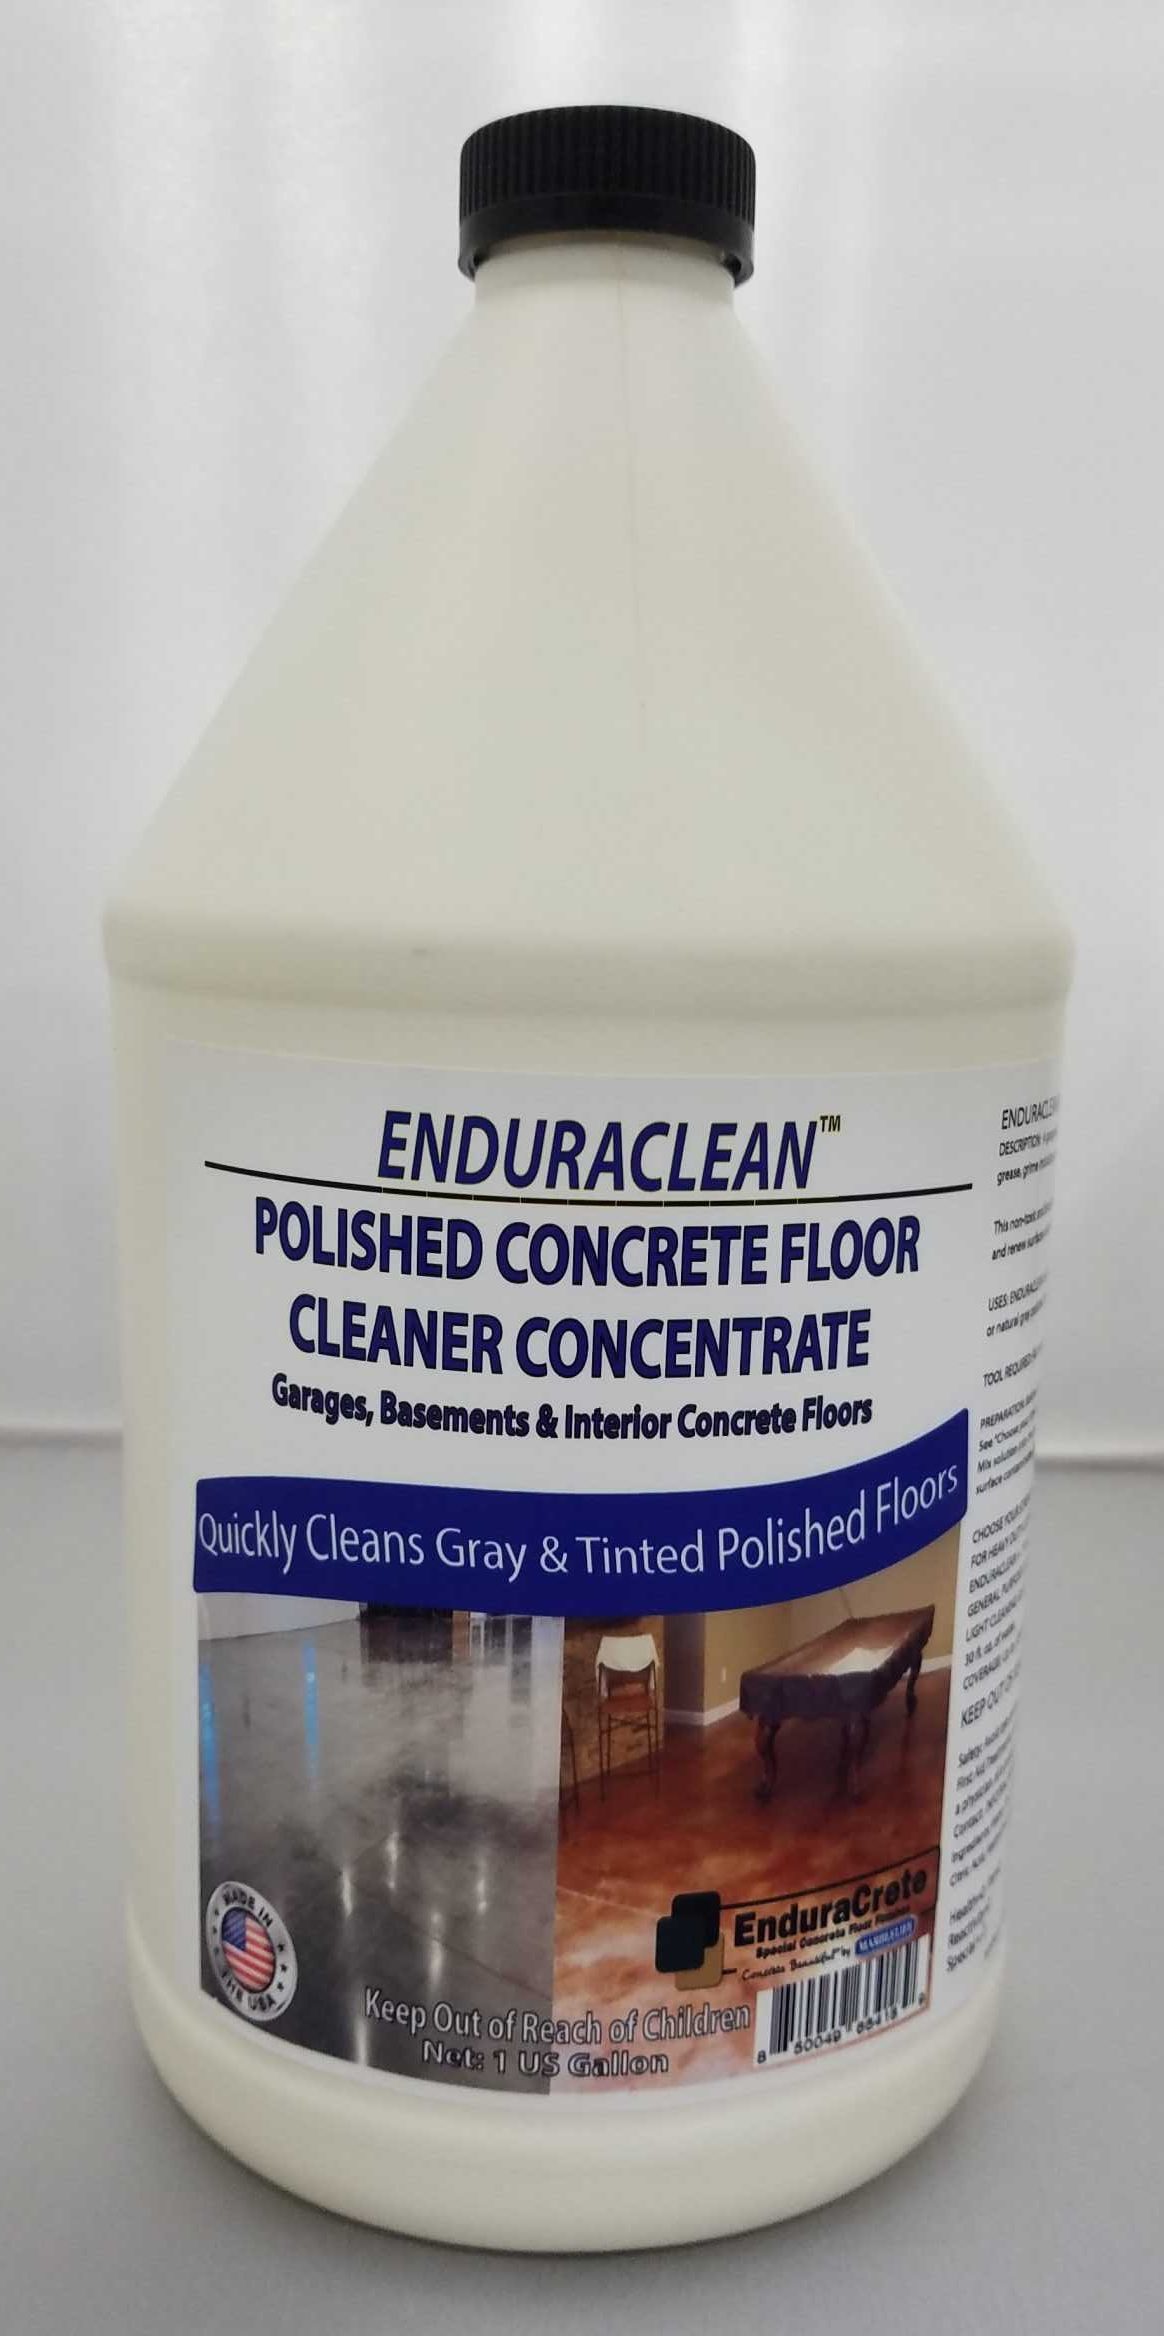 51009-128 - FRONT - ENDURACLEAN POLISHED CONCRETE FLOOR CLEANER CONCENTRATE